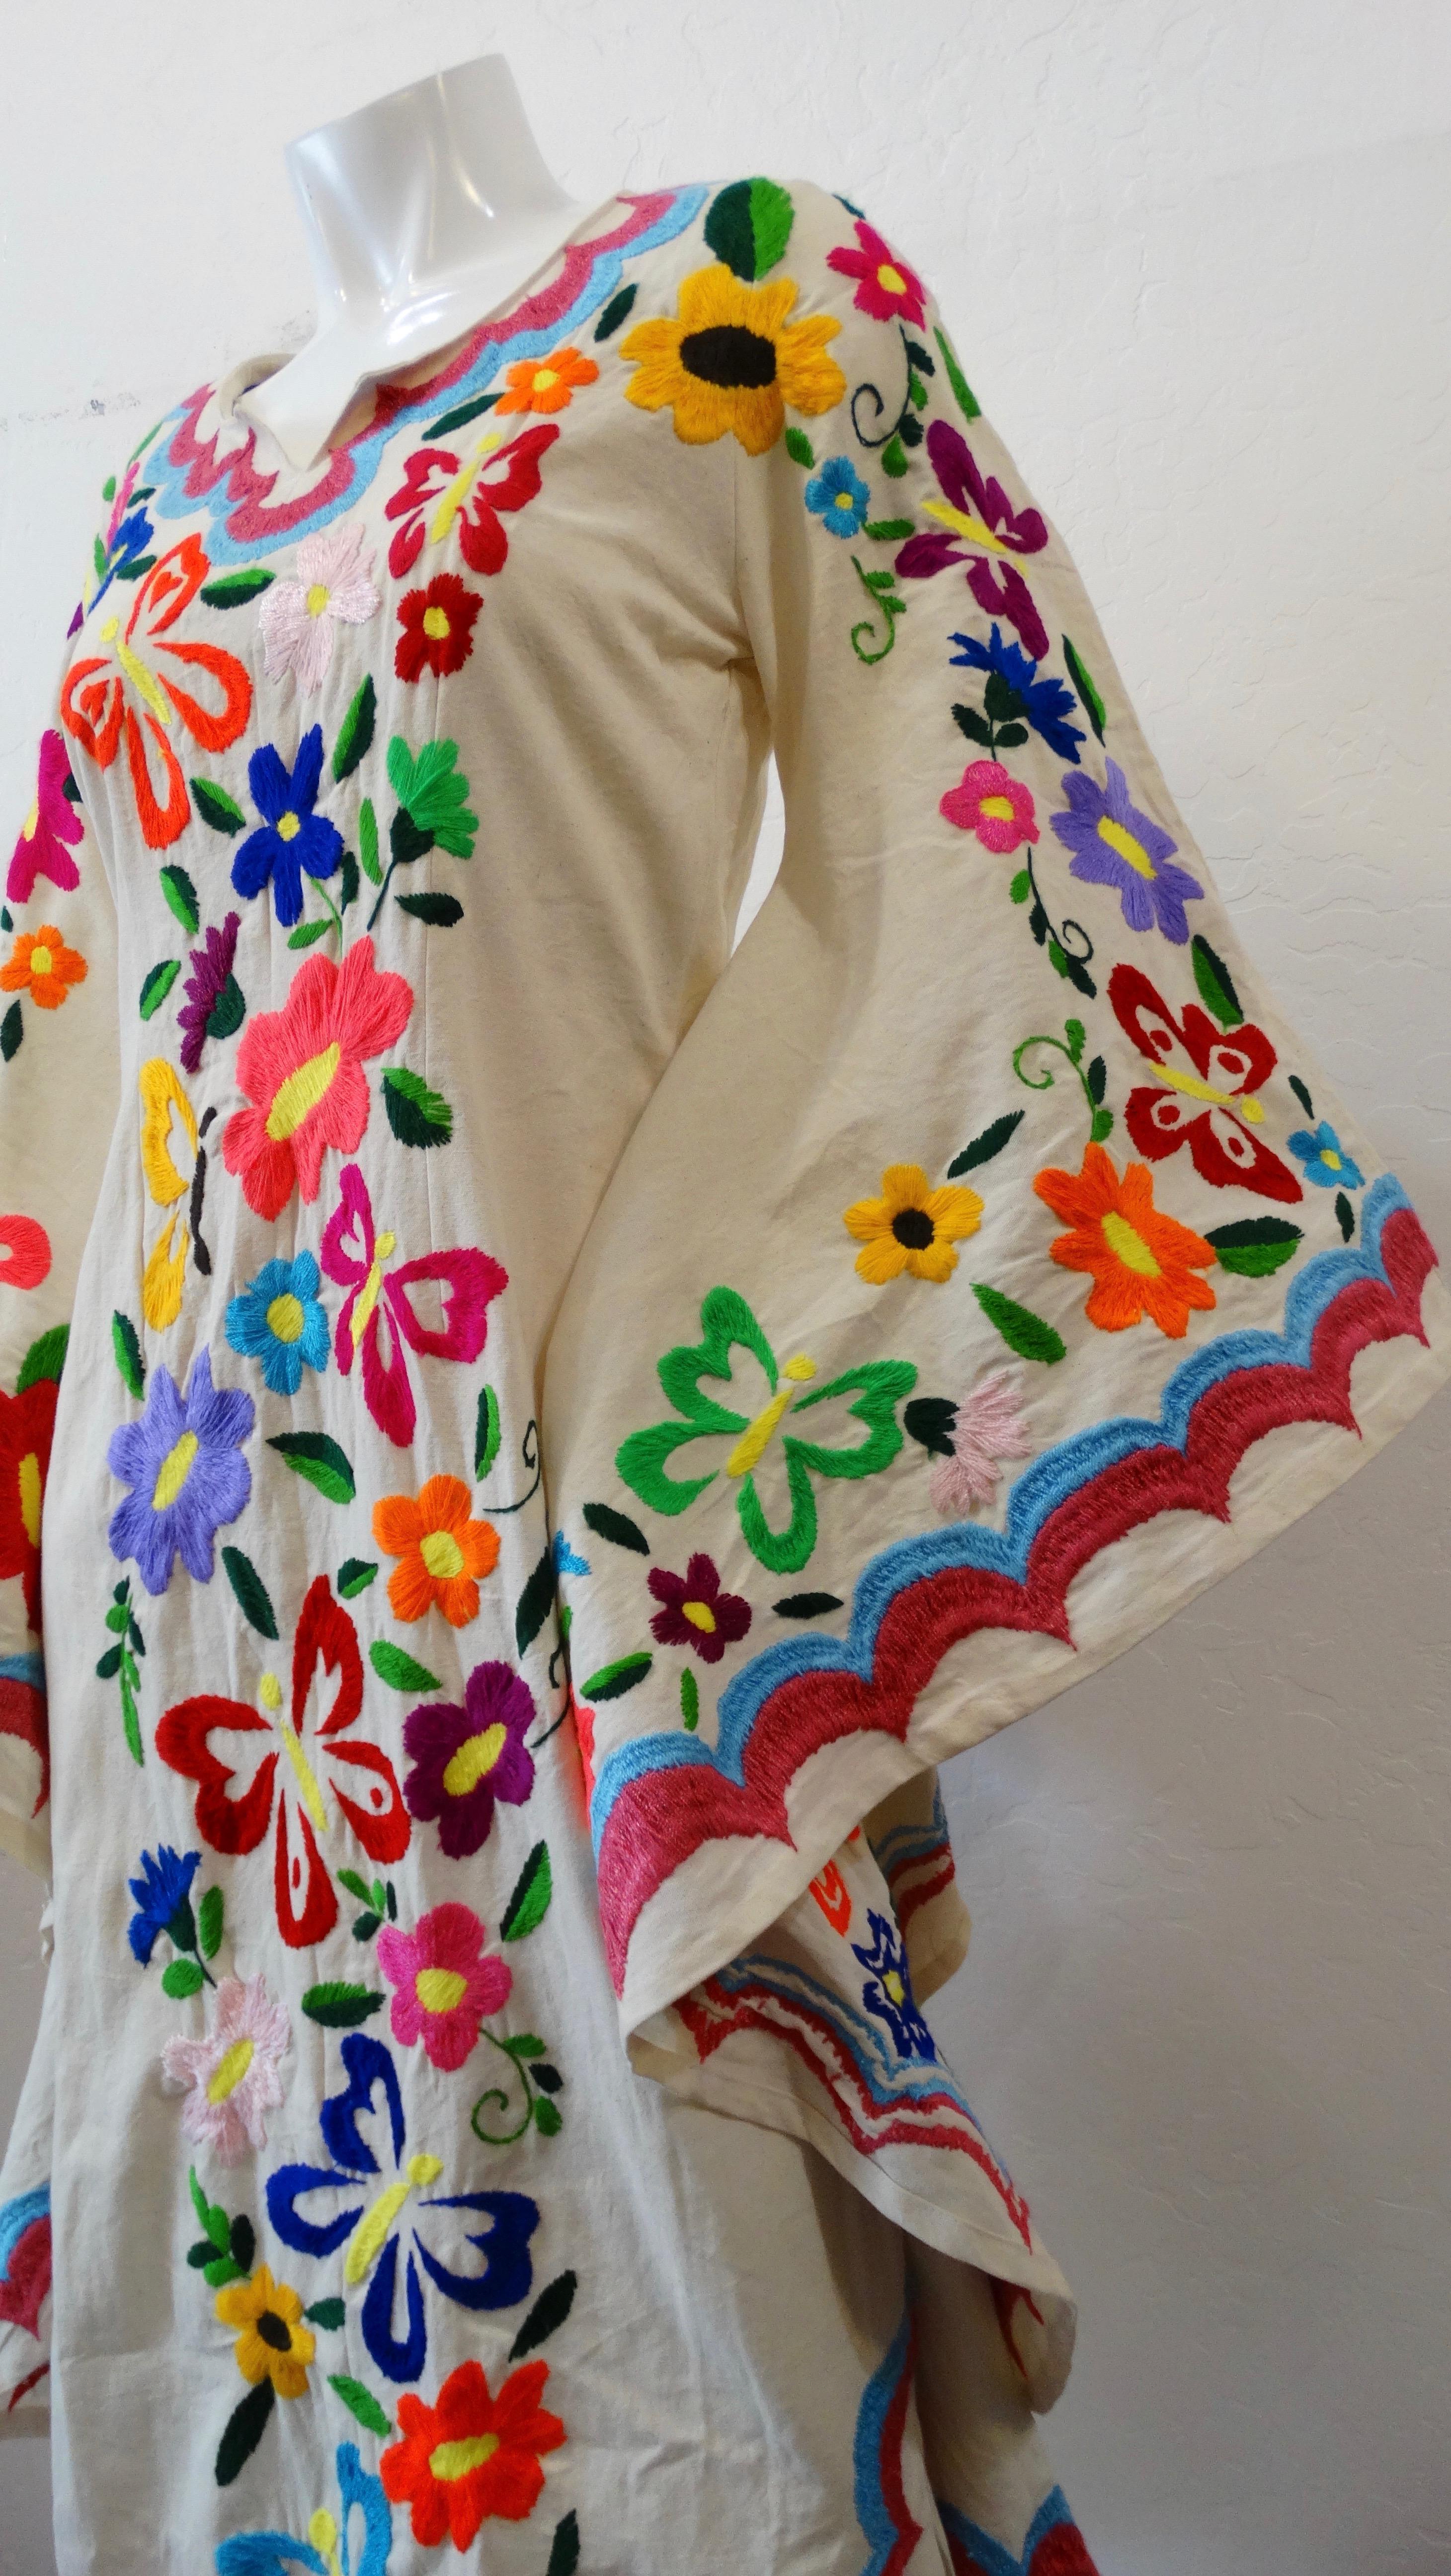 It doesn't get any more bohemian than this dress! This incredible kaftan boasts the longest angel wing sleeves we've ever seen! Covered in bright and colorful intricate floral and butterfly embroidery! Scooped neckline with notch at the center. Pair